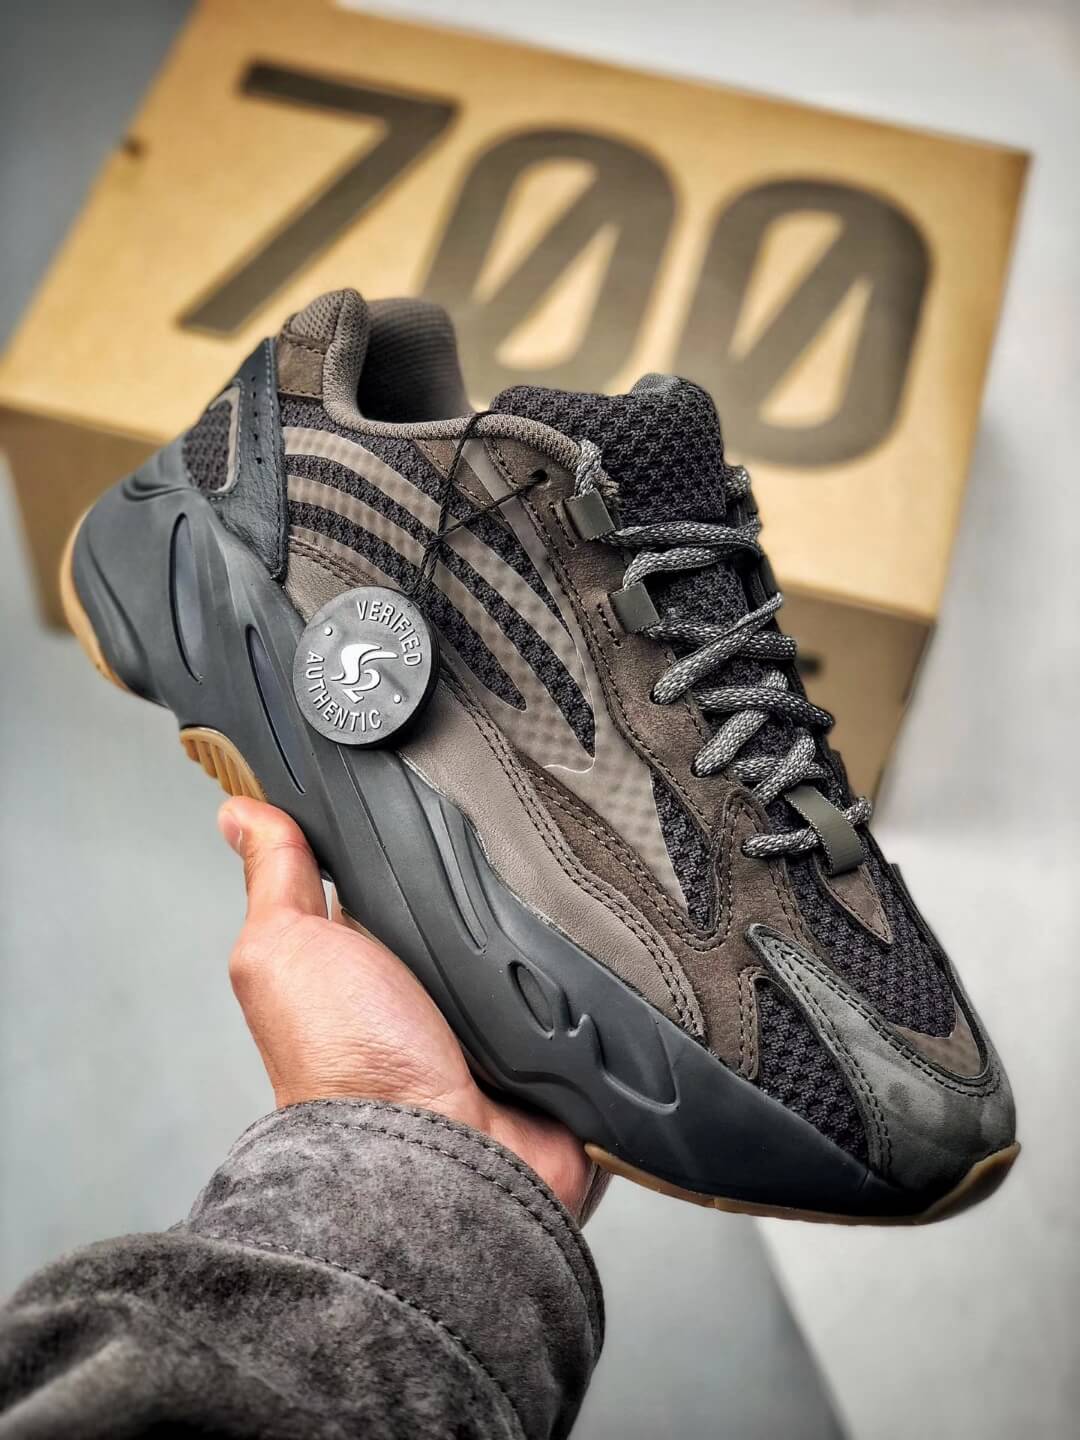 yeezy boots 700 v2